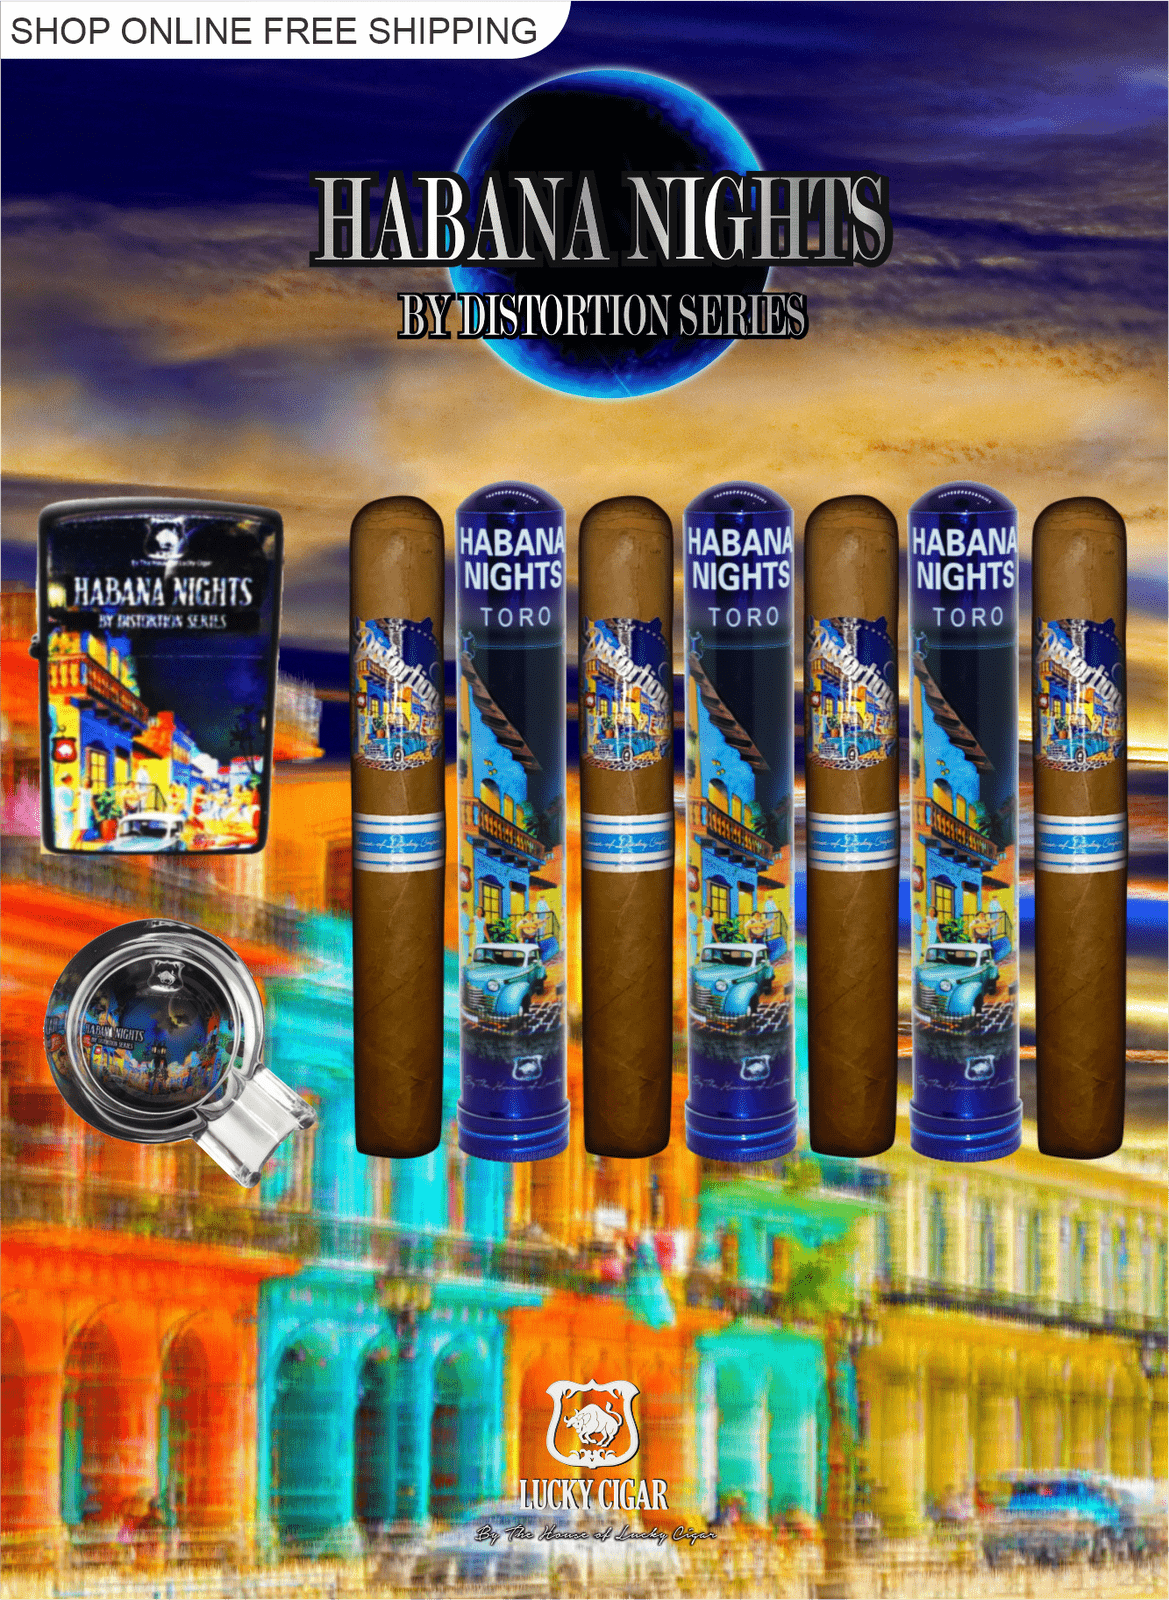 Habana Nights 6x50 Cigar From The Distortion Series: 4 Cigars with Flint Lighter and Ashtray